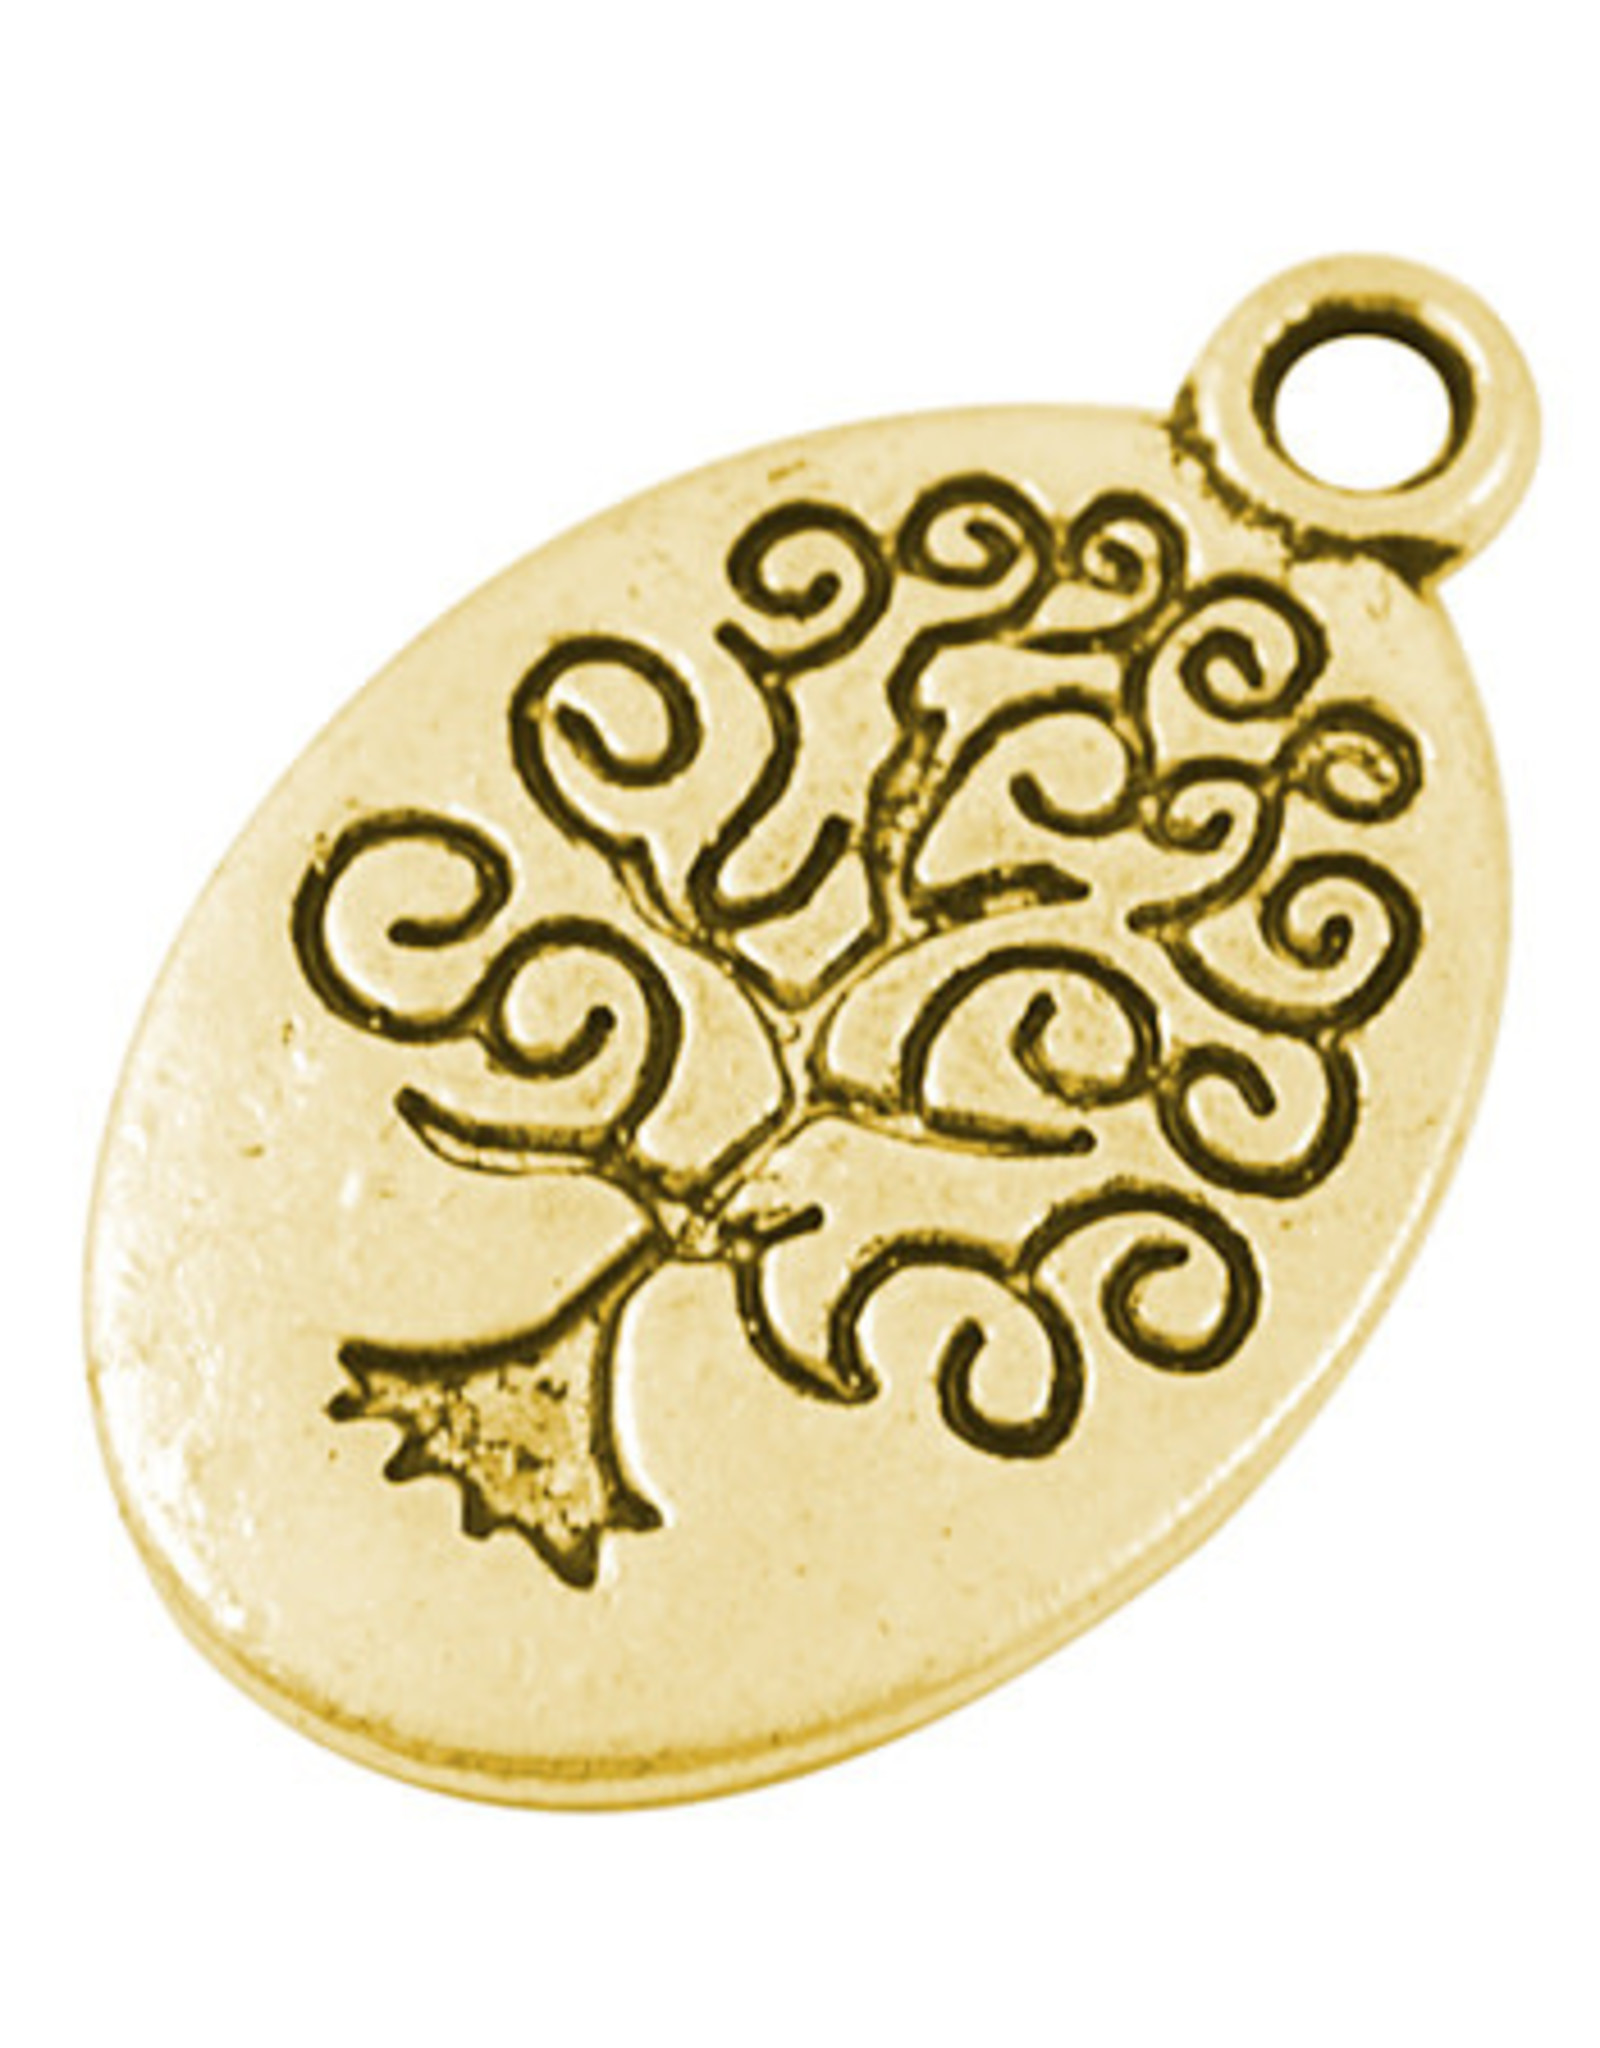 Tree of Life  25x15mm Antique Gold   NF  x10